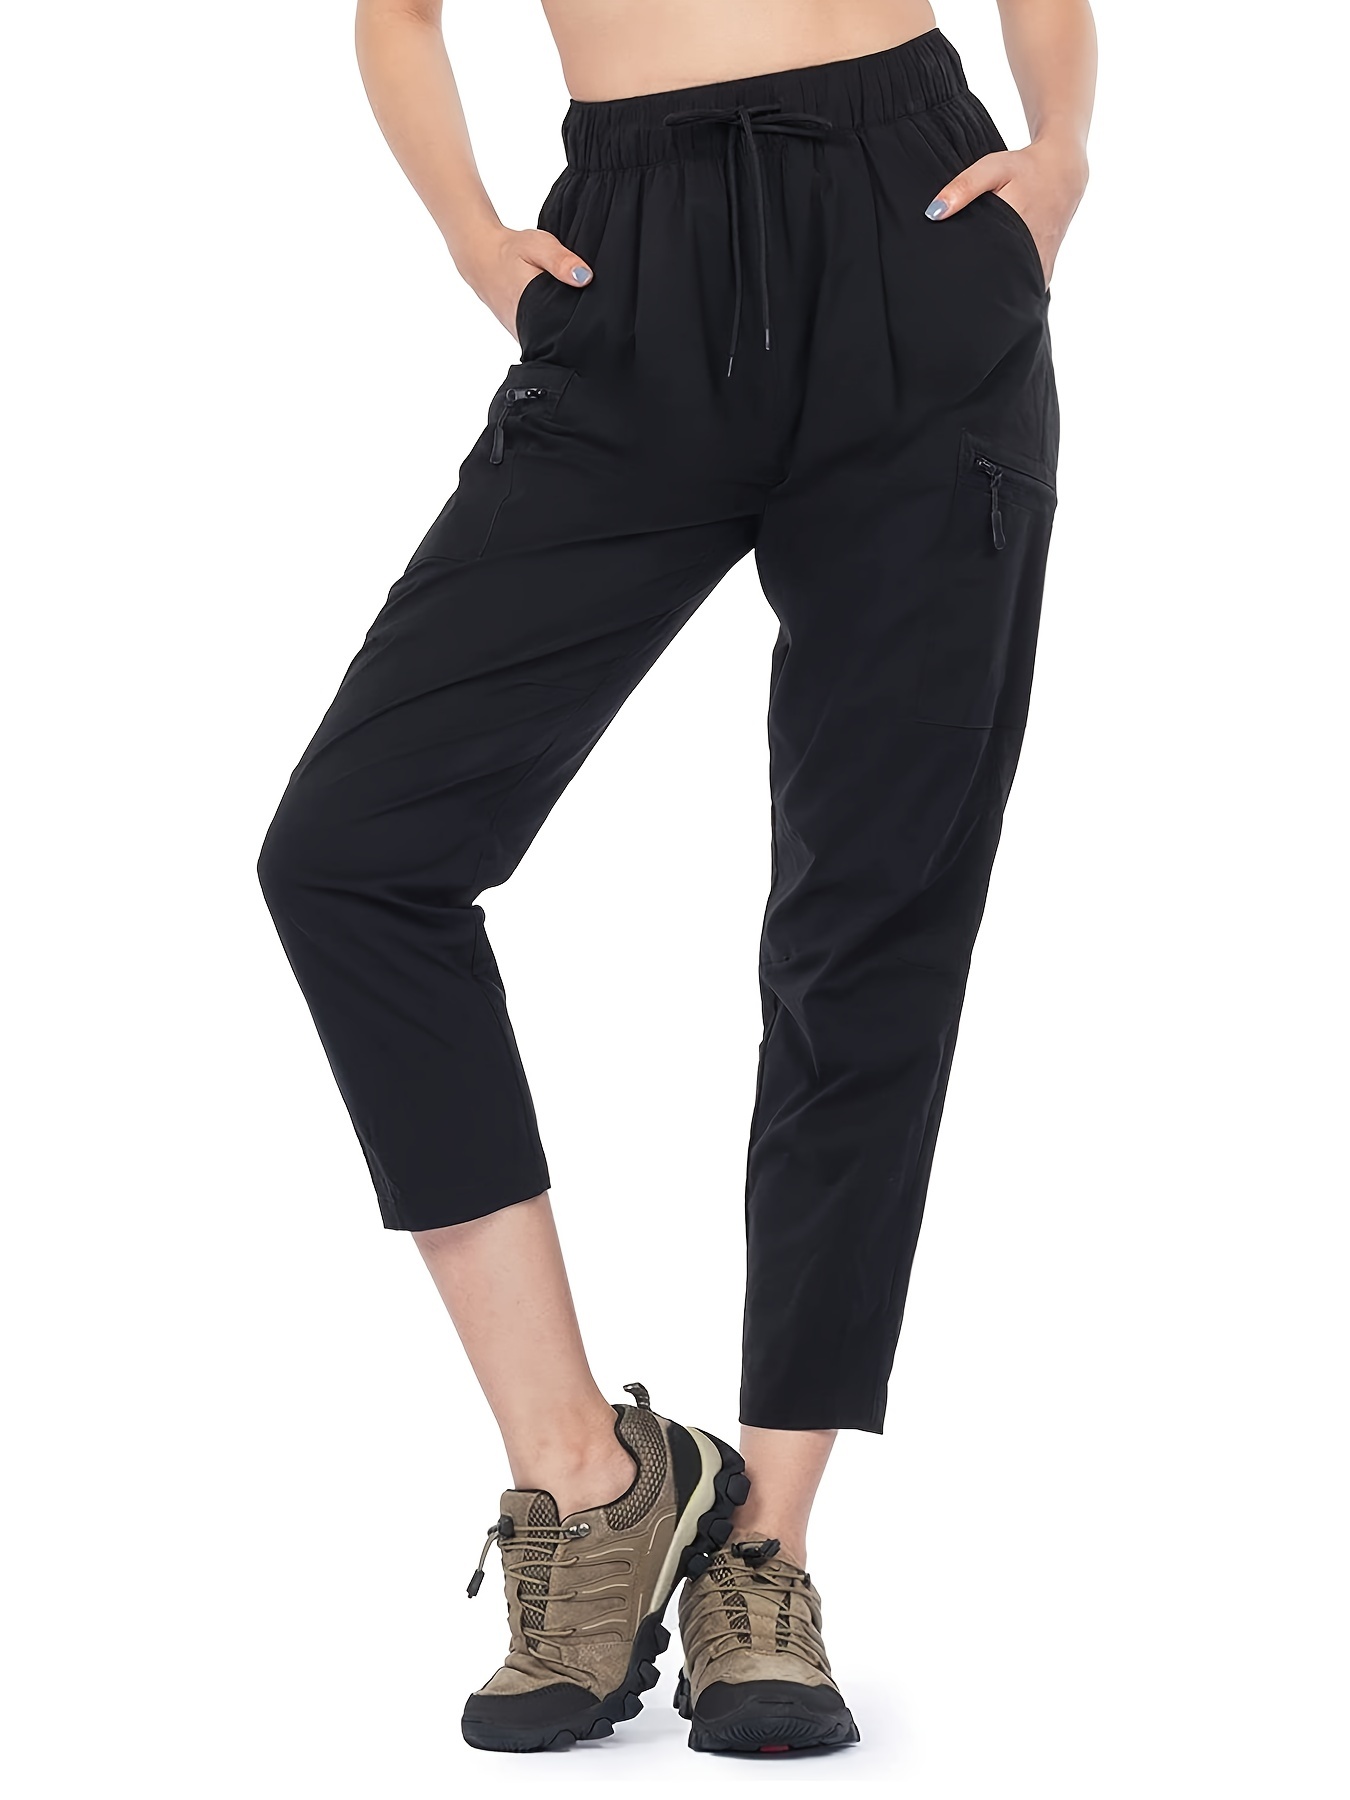 RKZDSR Plus Size Cargo Capris for Women Casual Summer Clearance Lightweight  Quick Dry Travel Hiking Pants Drawstring Elastic Waist Cropped Pants with  Pockets Running Black L 